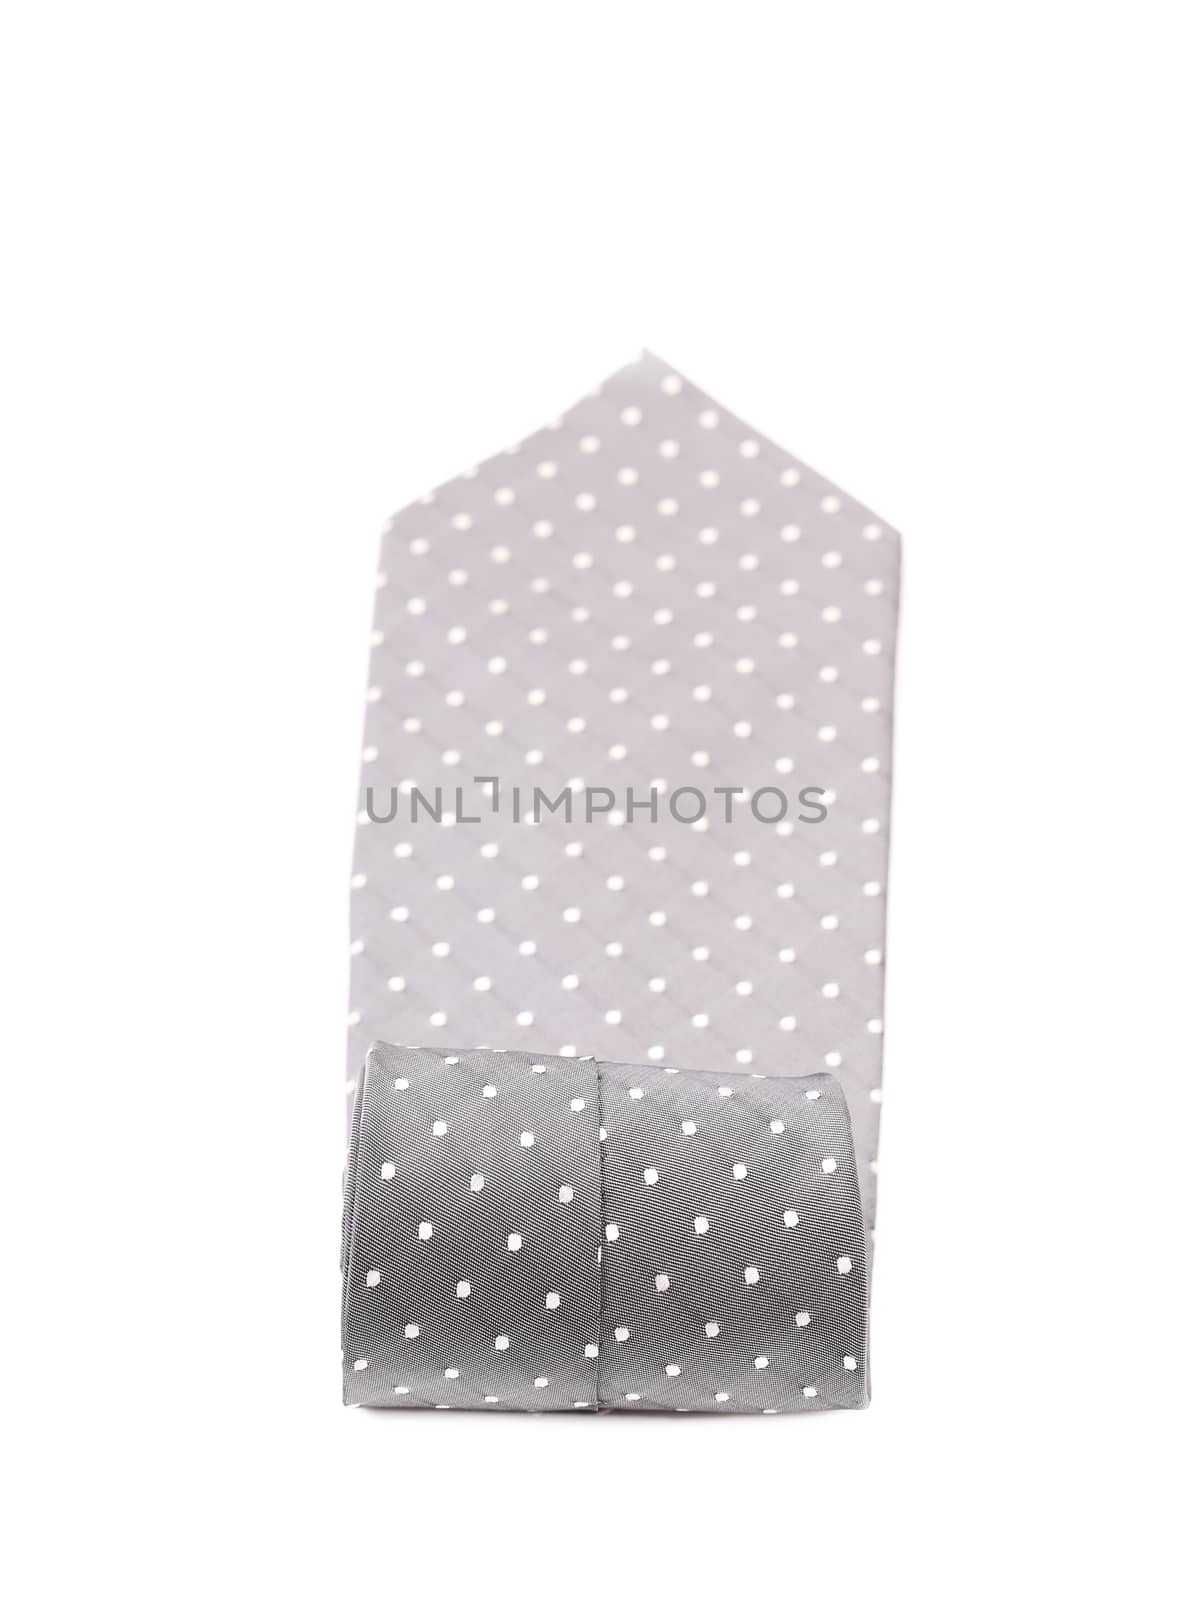 Folded gray tie with white speck. Isolated on a white background.